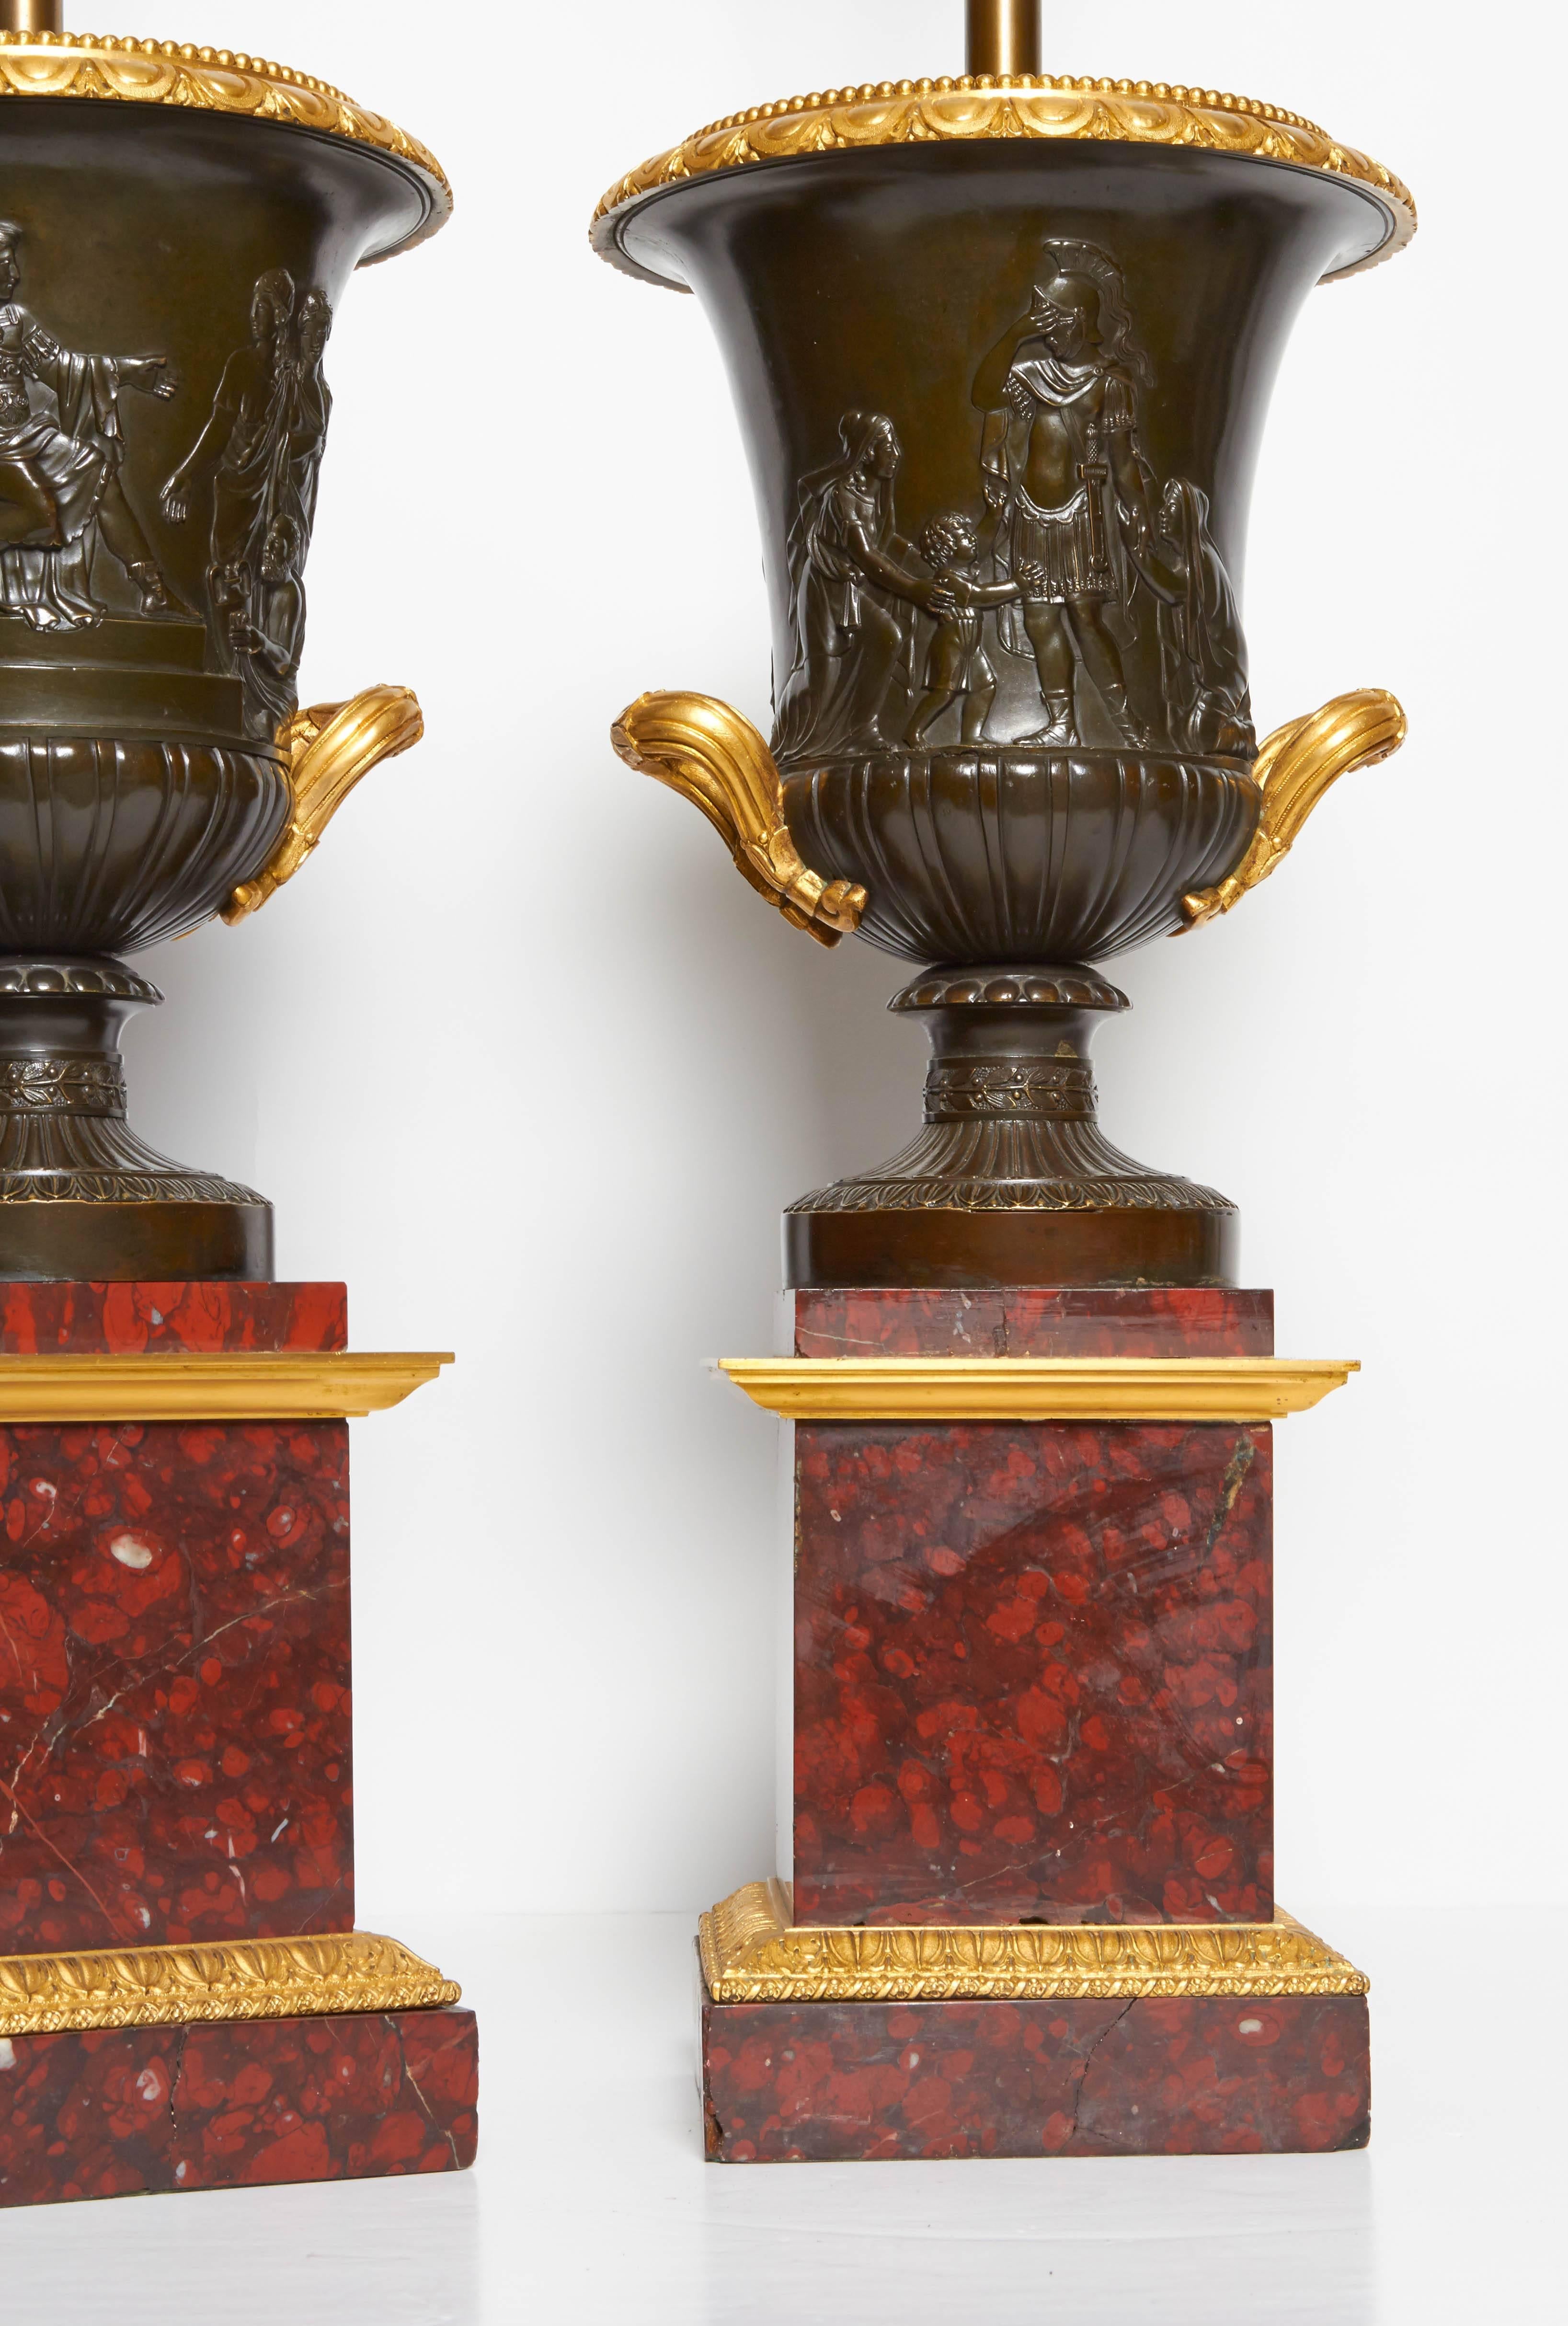 A fine pair of antique neoclassical grand tour period, two-toned patinated and doré bronze, Campagna shaped two handled urns. Each beautifully resting on an original rouge marble plinth finely mounted with ormolu mounts. Each vase finely casted and